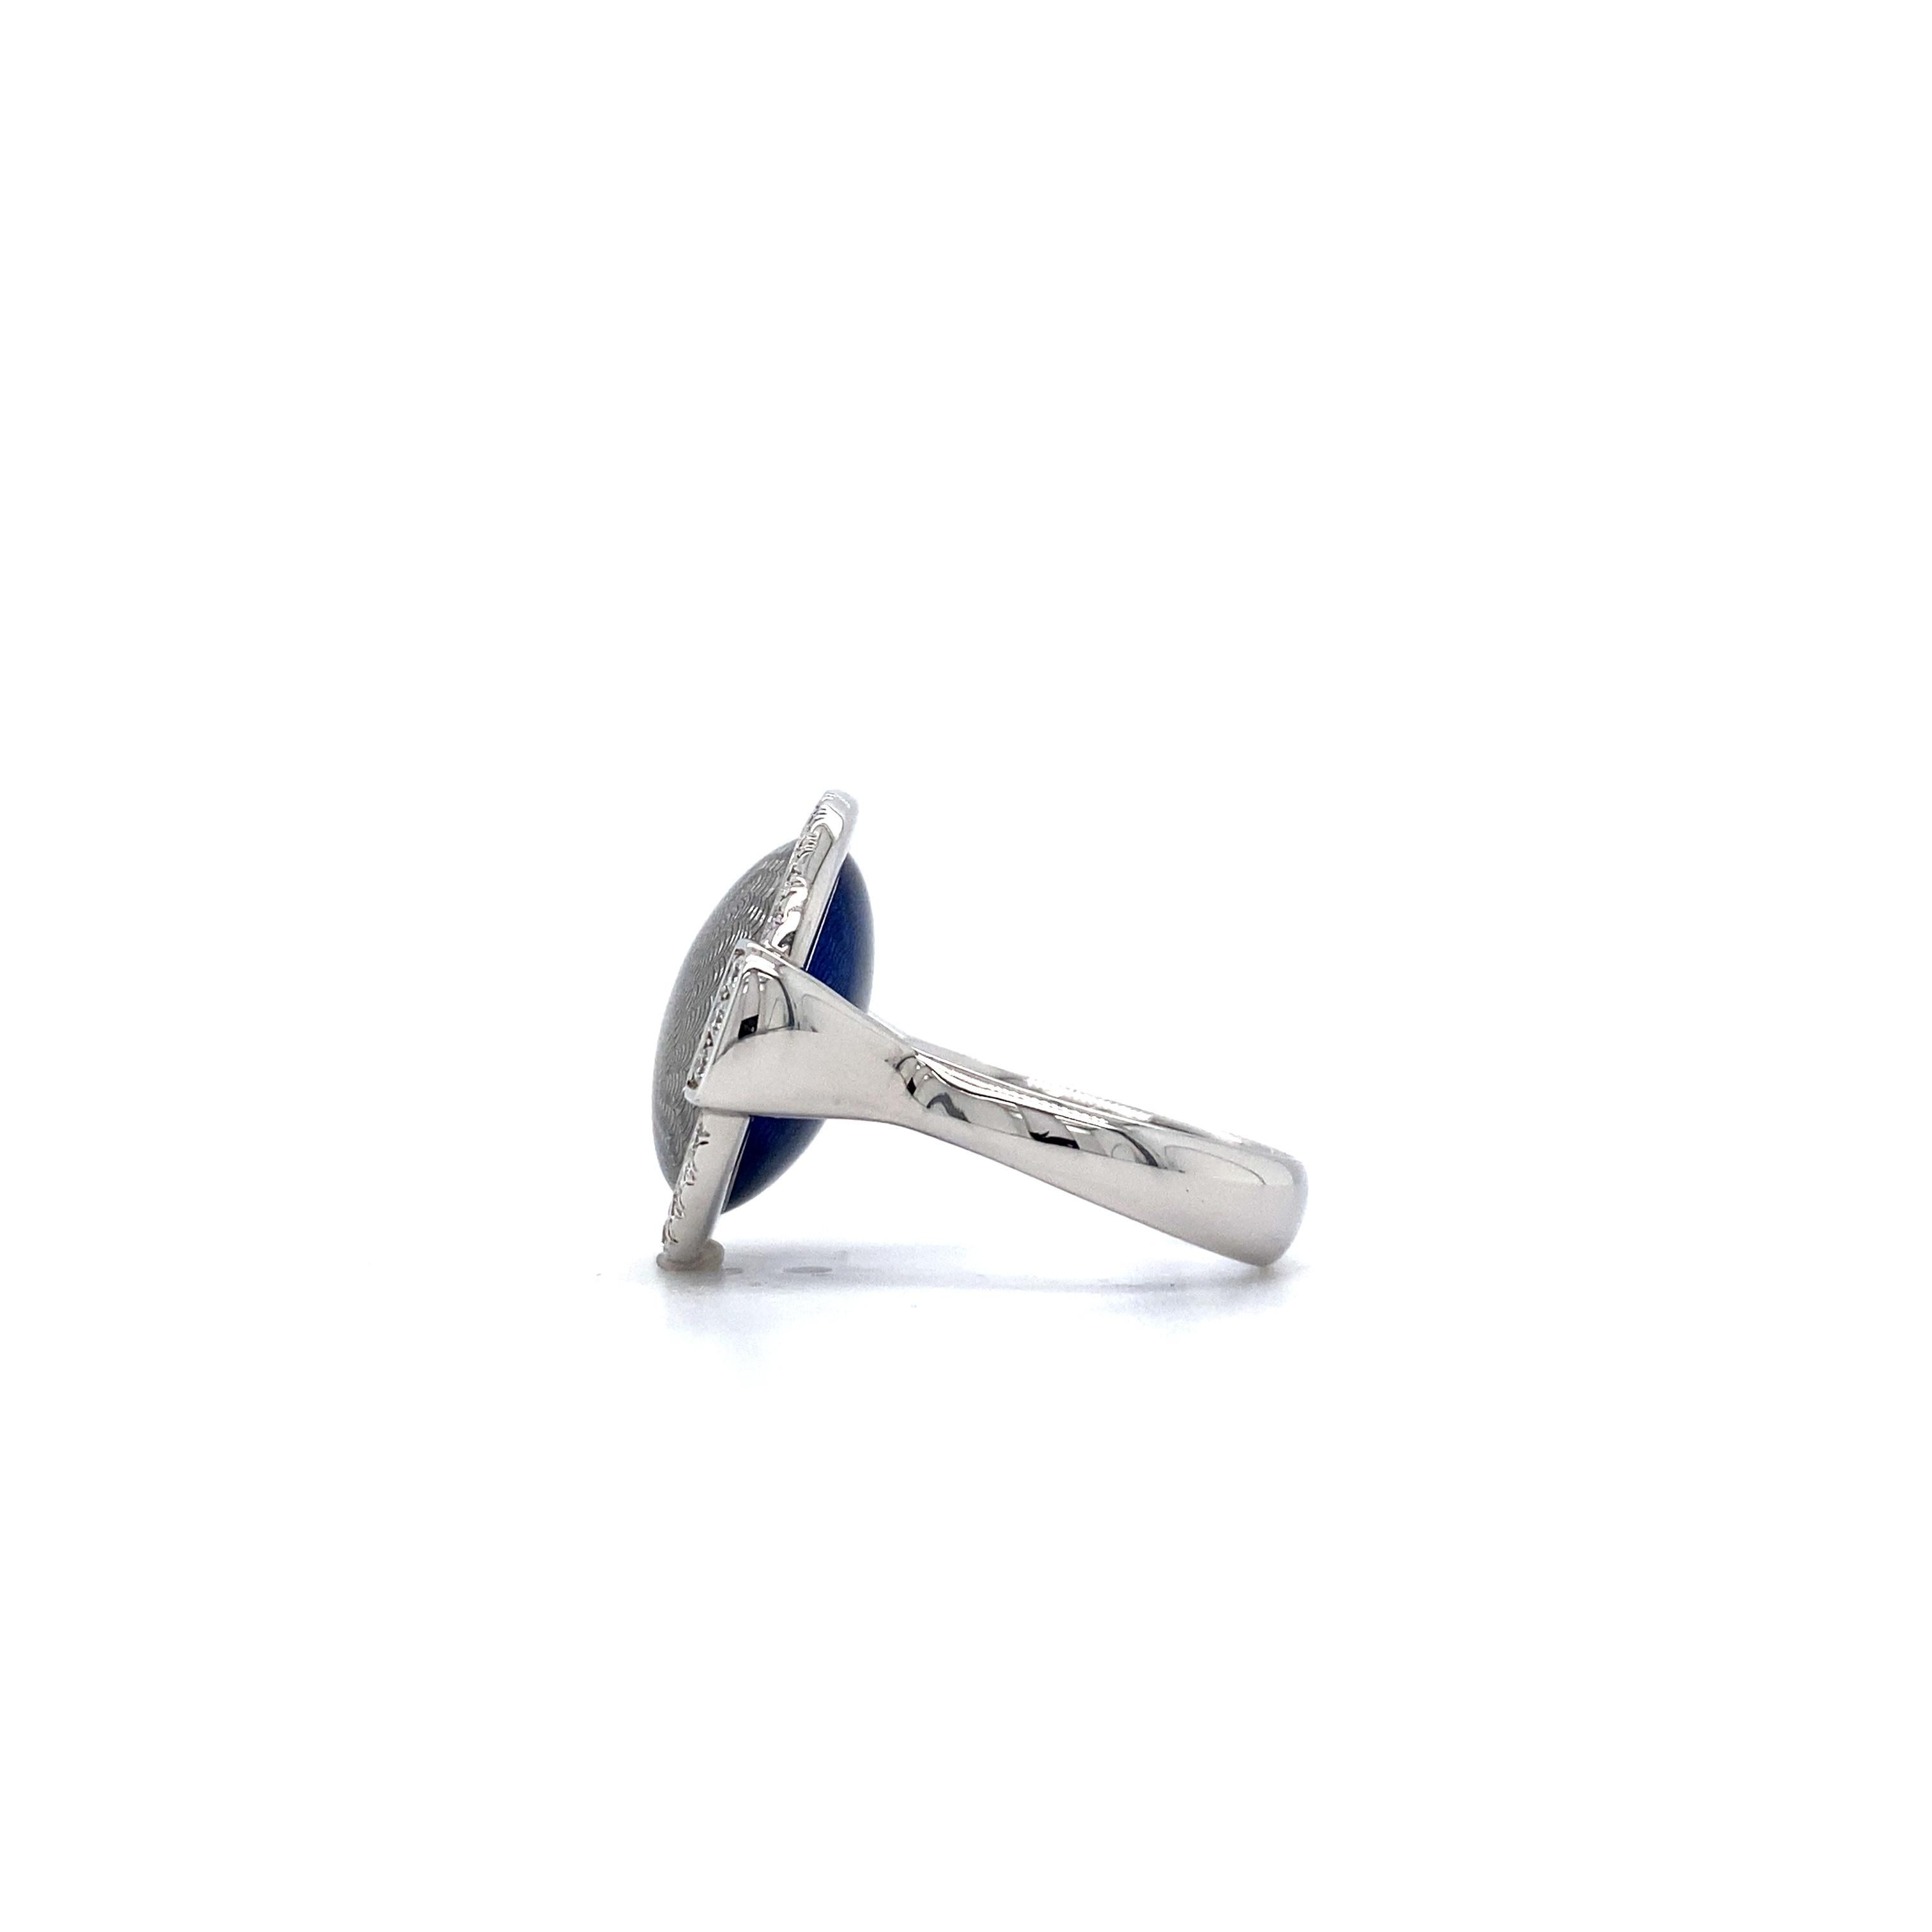 Victor Mayer Ring Candy Silver Blue Enamel 18k White Gold 78 Diamonds 0.47 ct For Sale 2